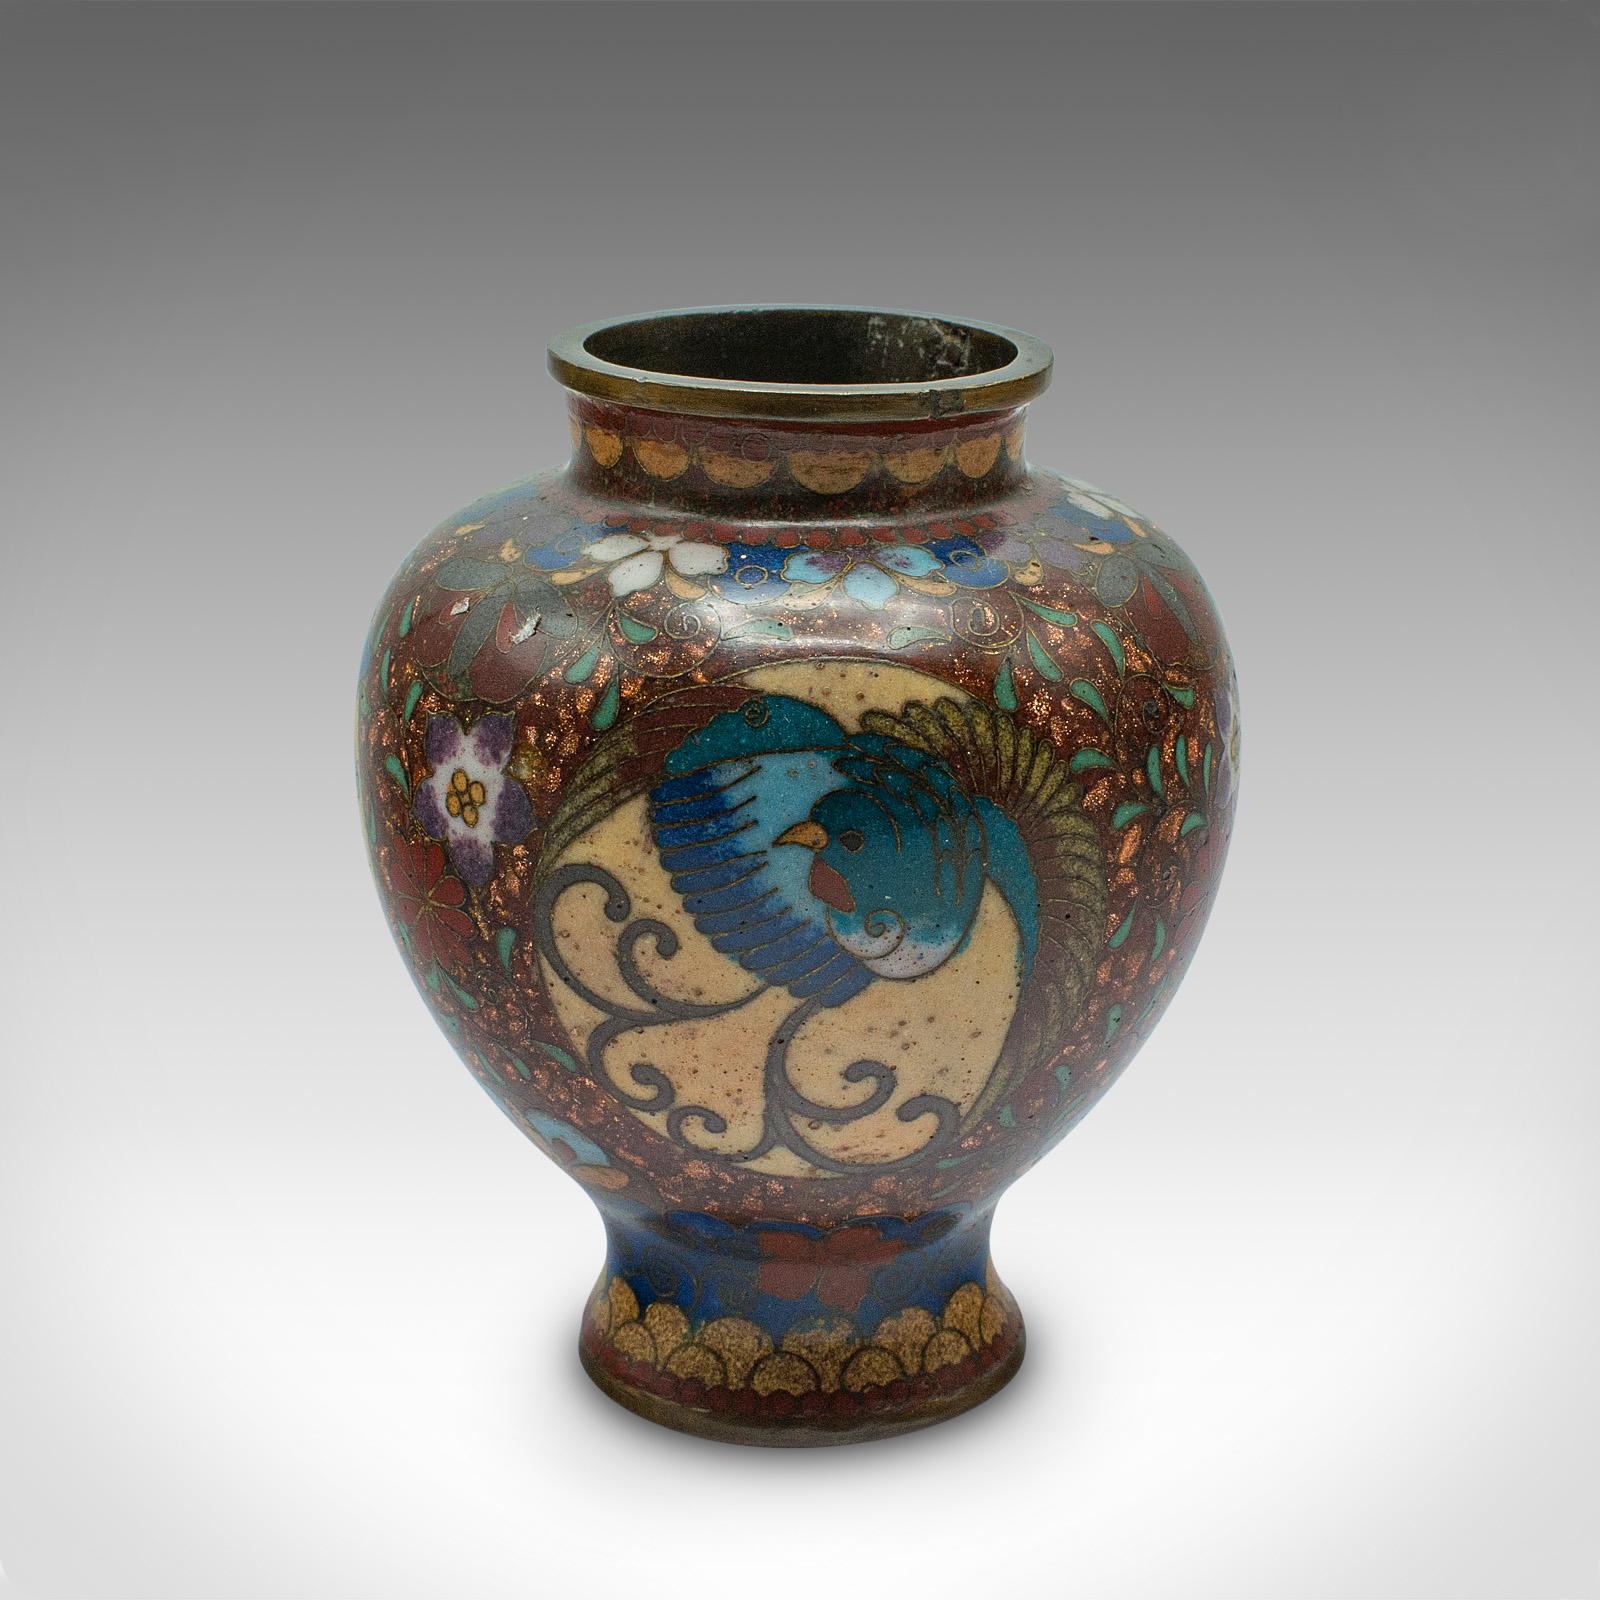 
This is a small vintage posy vase. A Chinese, cloisonné display urn, dating to the Art Deco period, circa 1940.

Petite yet ornate vase, with charming decorative appeal
Displays a desirable aged patina and in good order
Cloisonné form with a deep